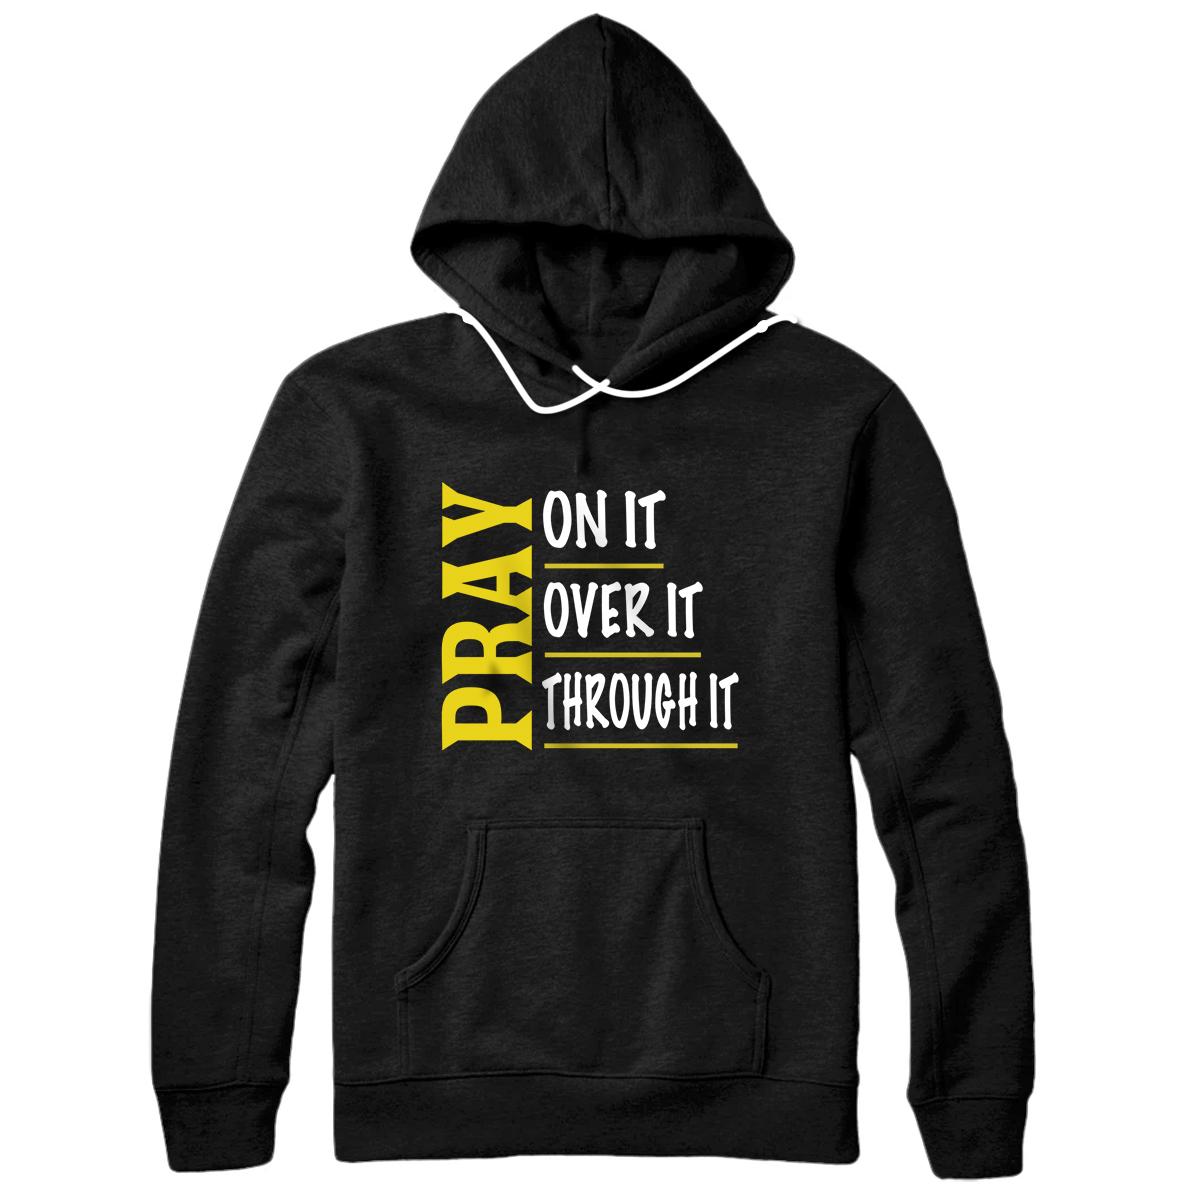 Personalized Christian Gifts Women Men Pray To Make America Godly Again Pullover Hoodie